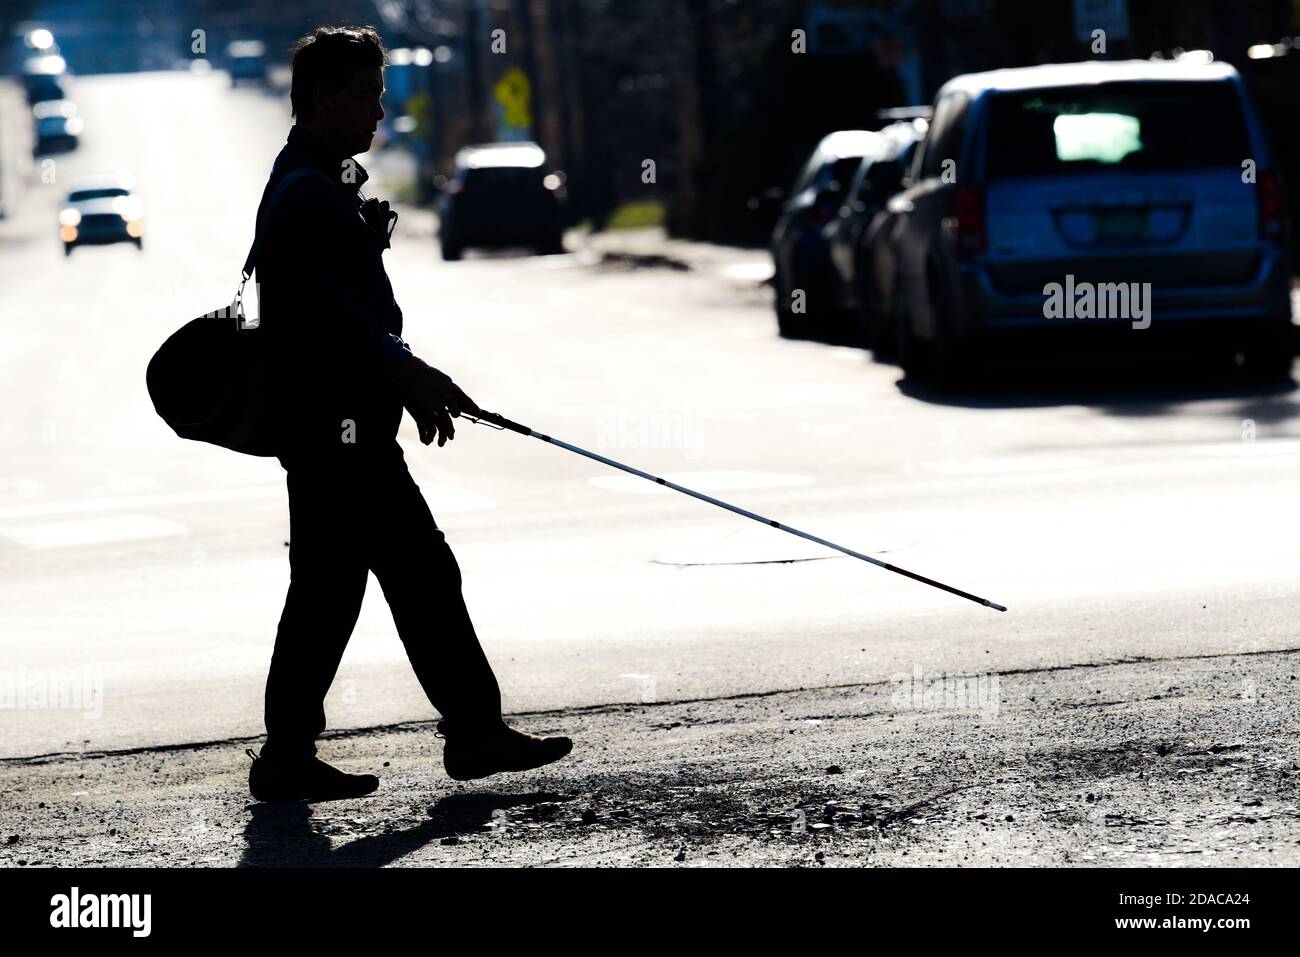 https://c8.alamy.com/comp/2DACA24/silhouette-of-visually-impaired-man-walking-with-white-cane-montpelier-vt-new-england-usa-2DACA24.jpg